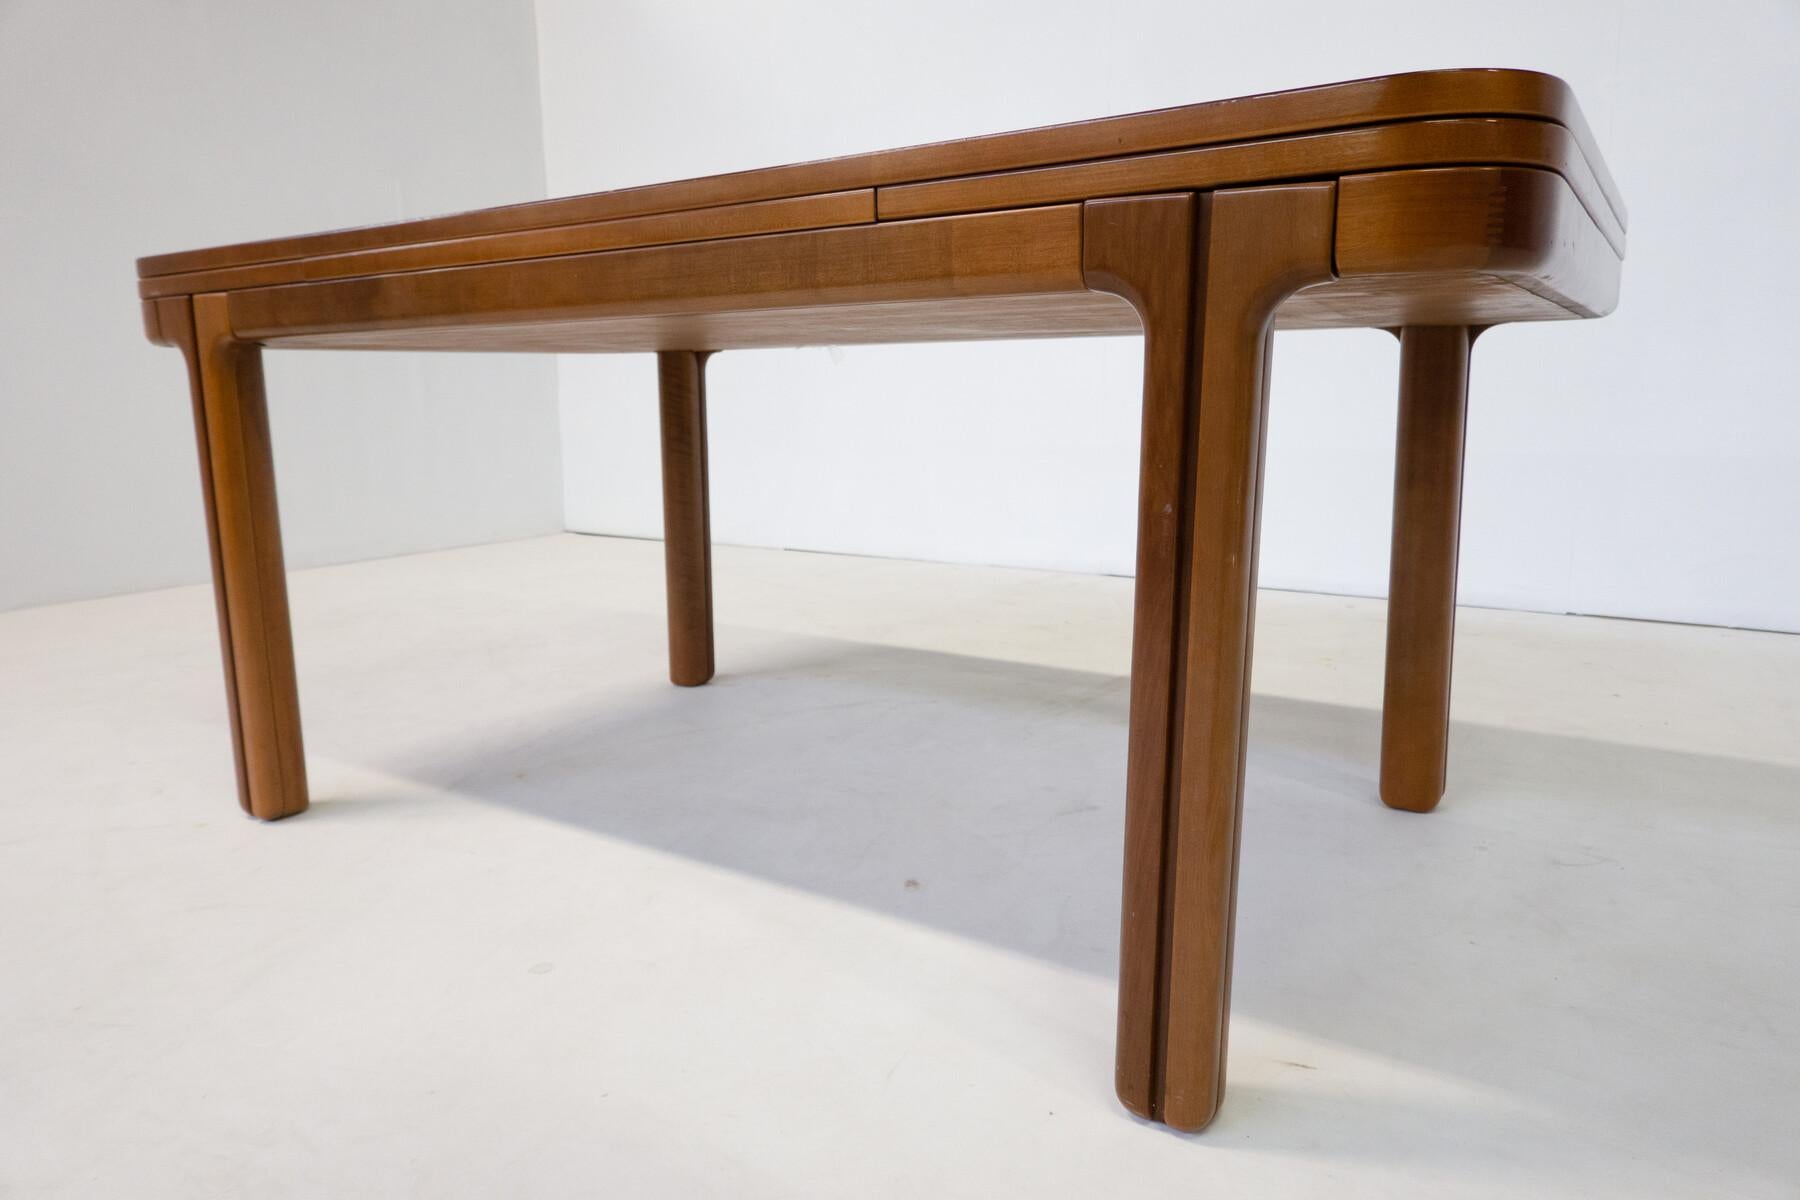 Wood Mid-Century Modern Extendable Dining Table by Llmari Tapiovaara, Finland, 1950s For Sale